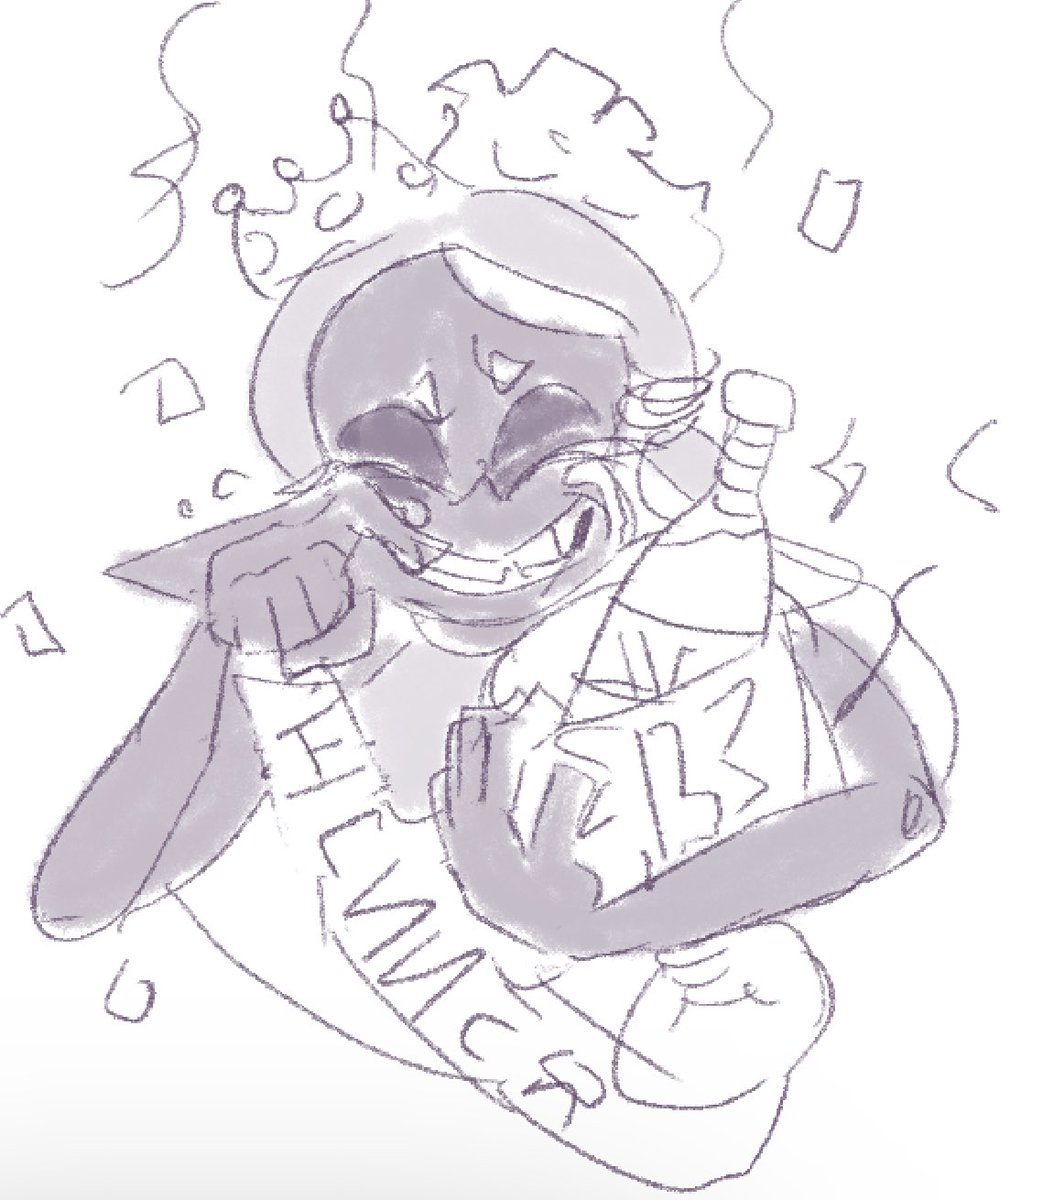 you deserve it and the world I'm so proud of you #splatfest #splatoon3 #fryesweep